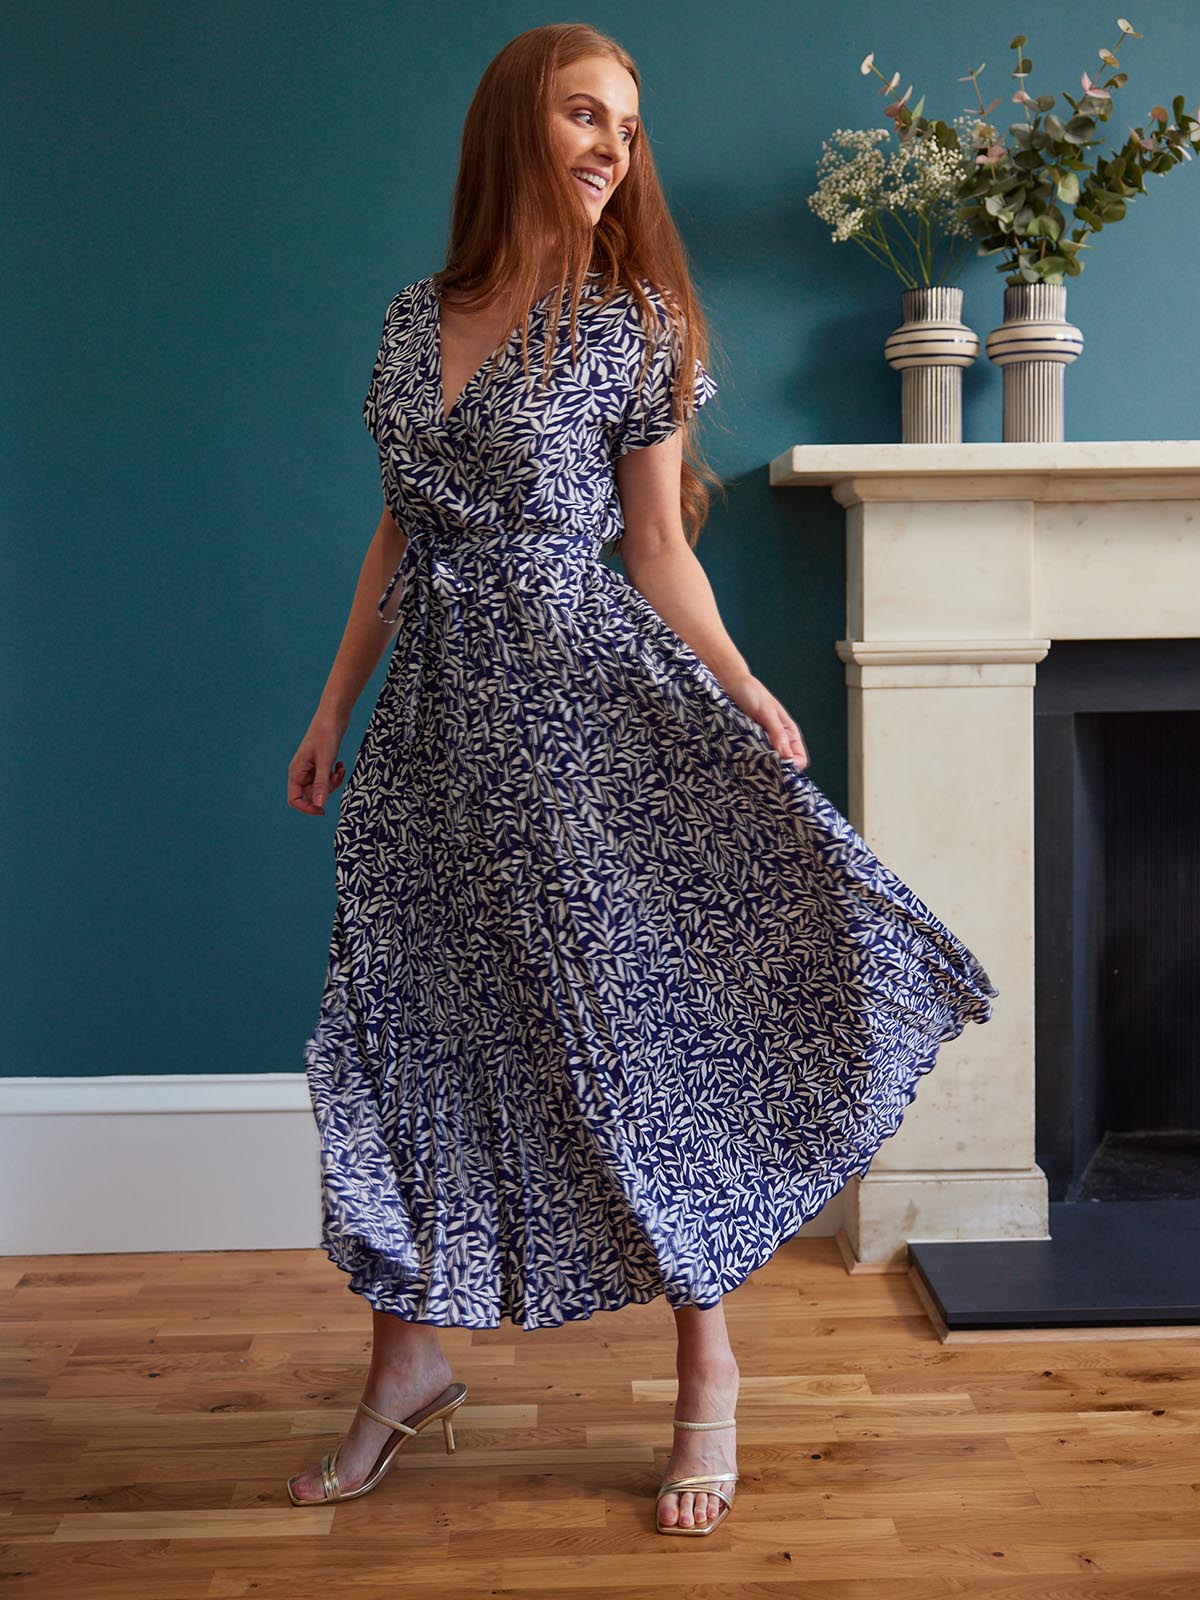 A model stands in front of a fireplace in a living area, wearing the sustainable Nena dress from This is Unfolded. They are holding the pleated fabric out slightly and smiling.